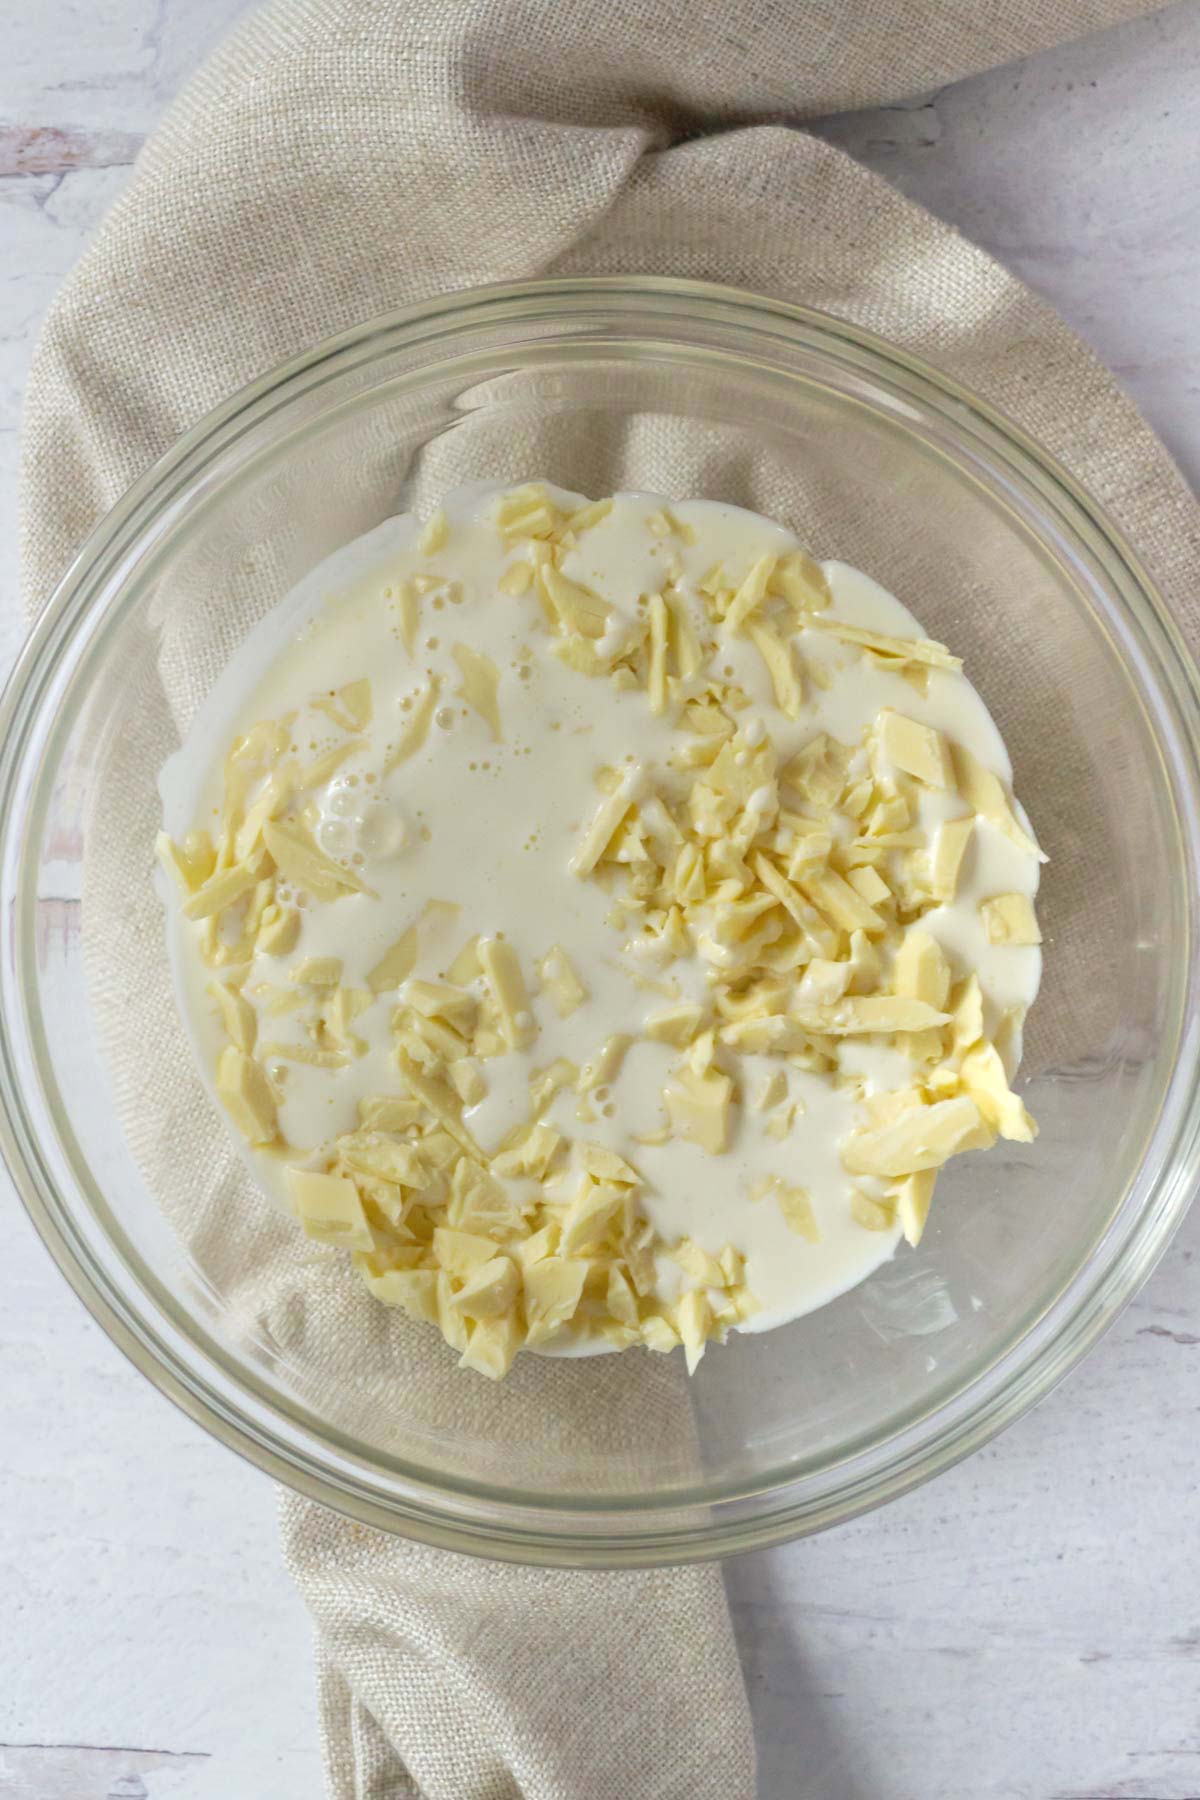 chopped white chocolate and cream in a mixing bowl